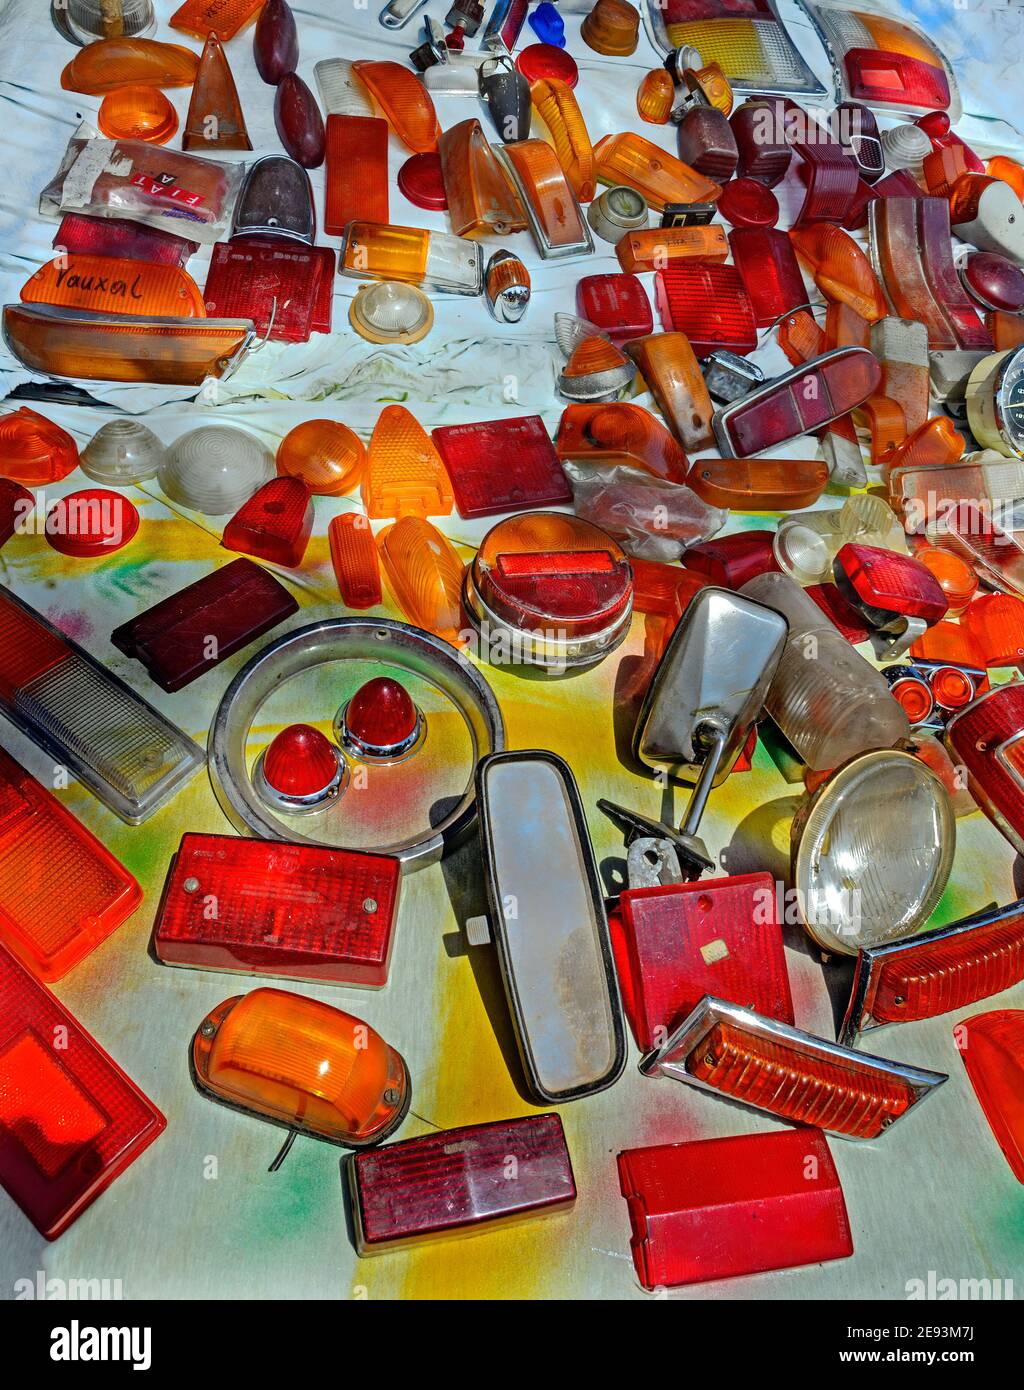 used orange and red transparent covers made from plastic for car lights Stock Photo